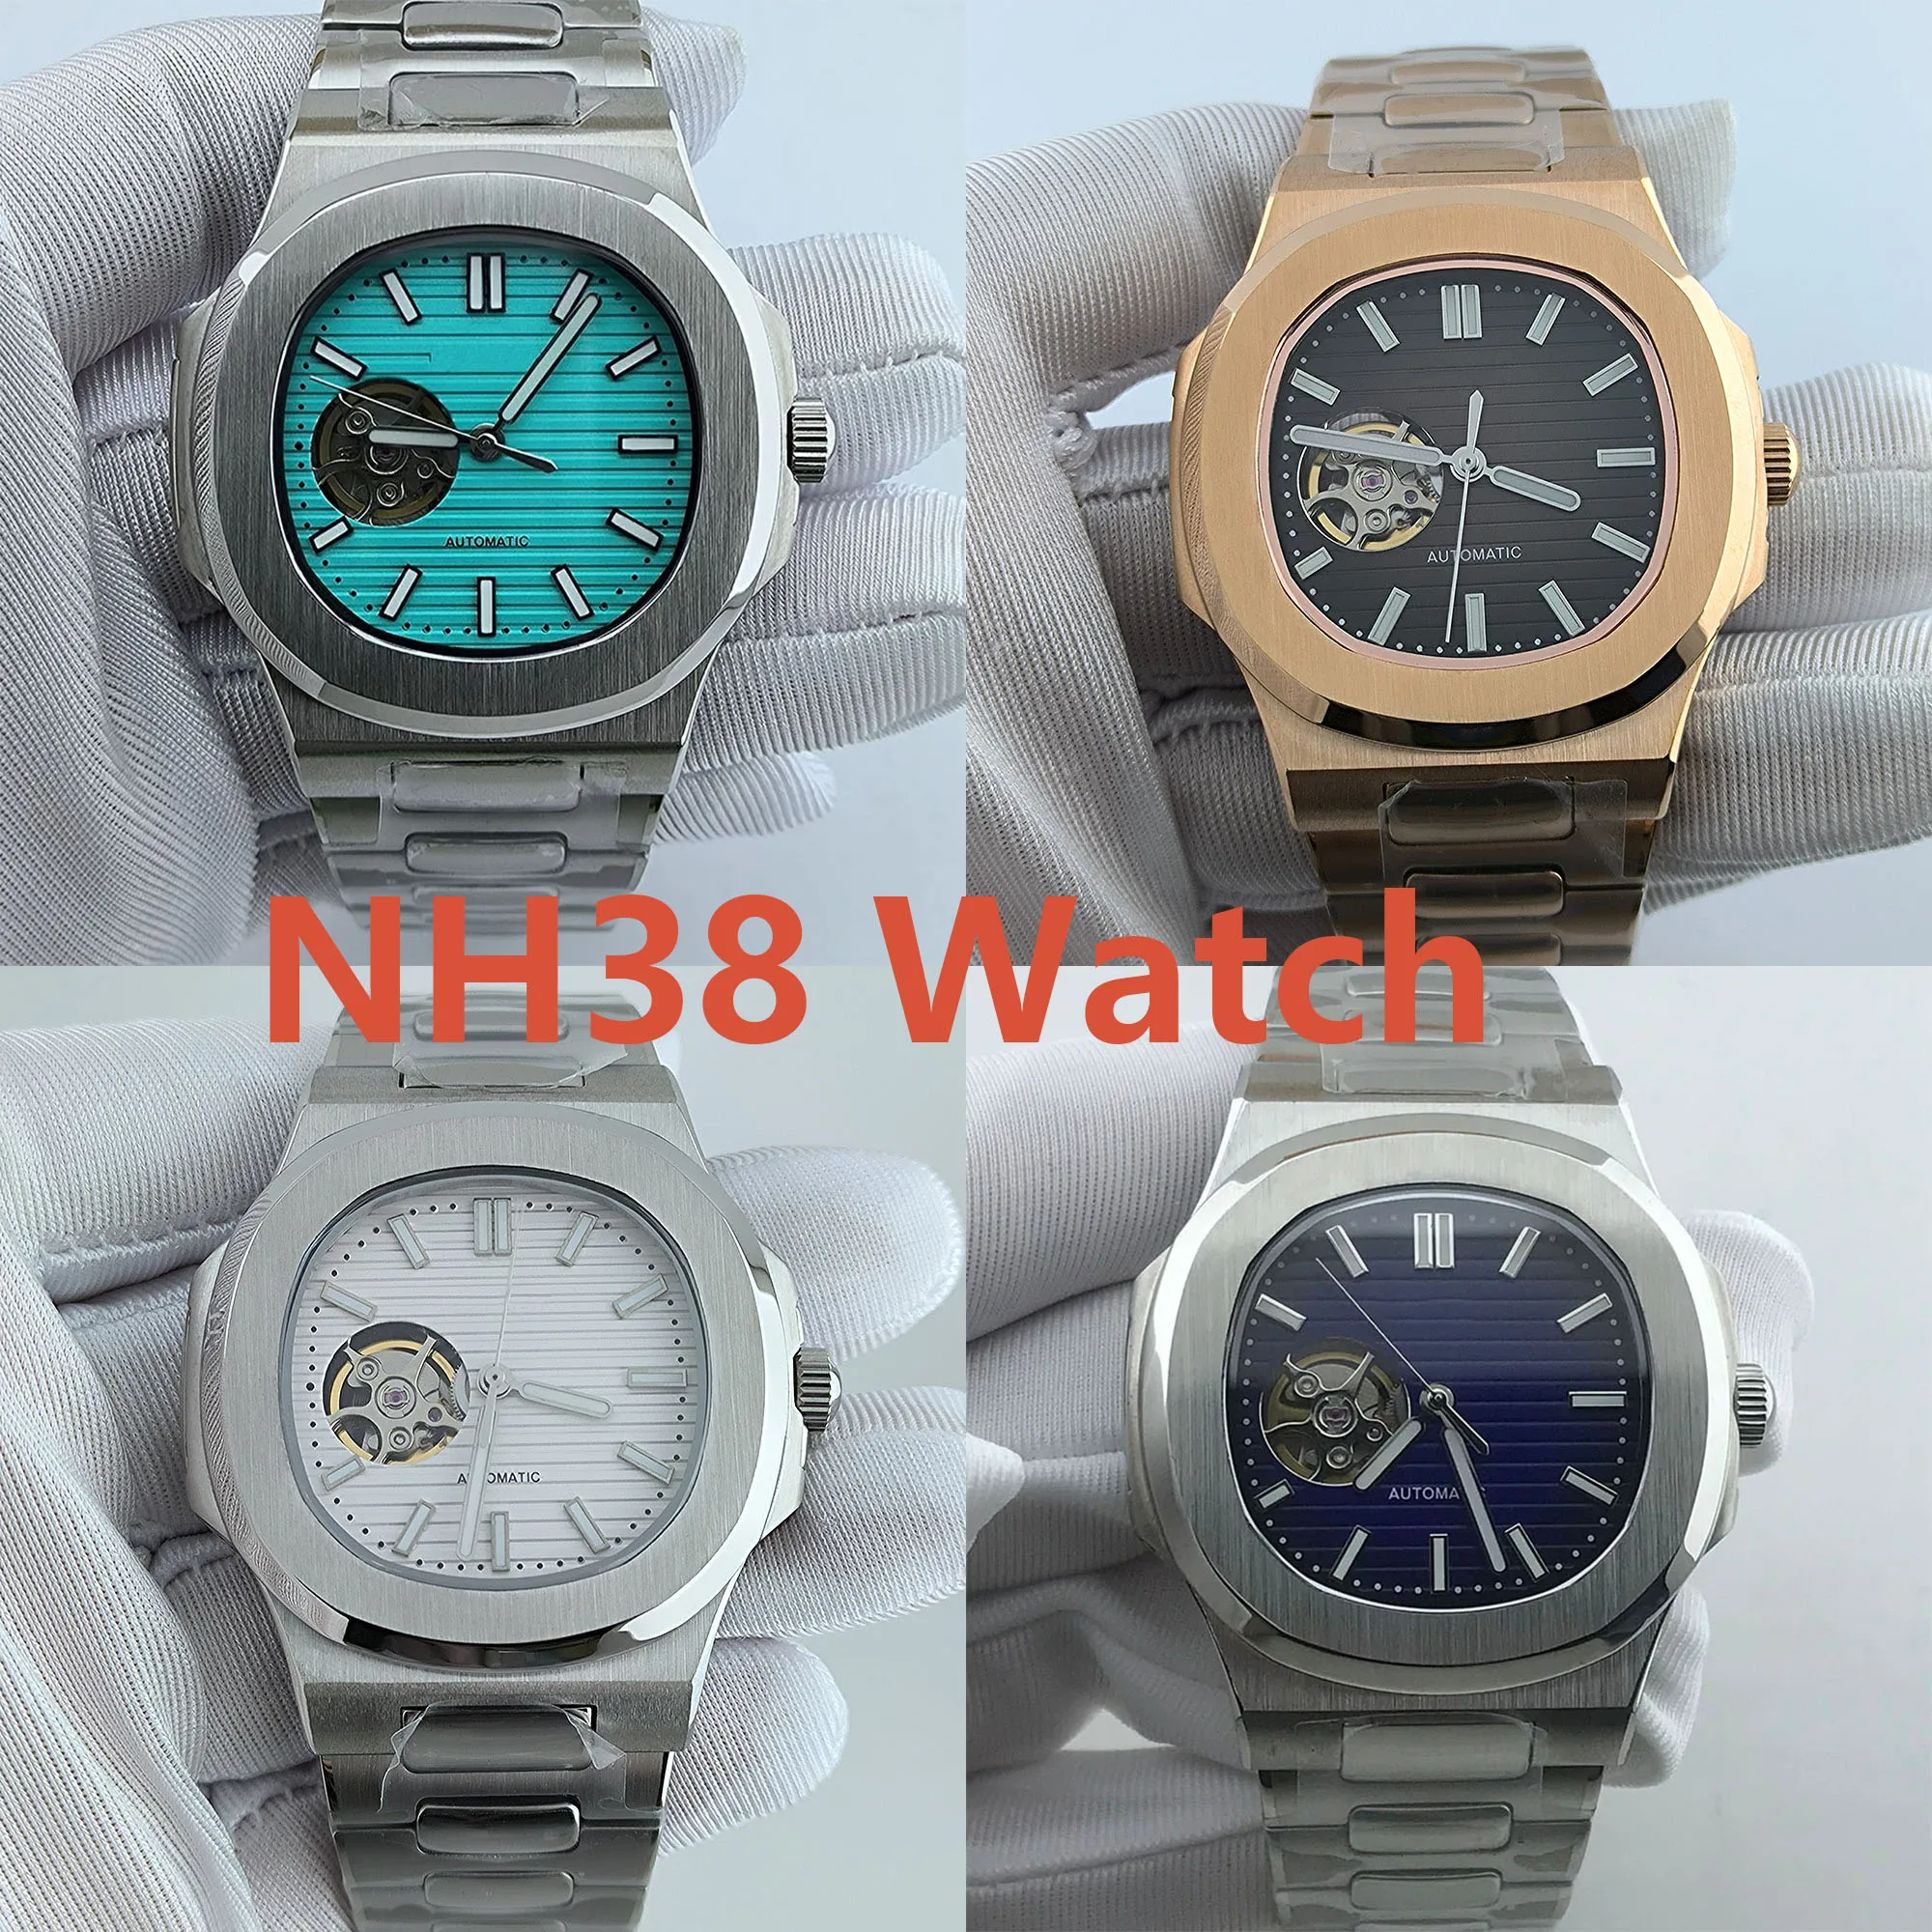 

NH38 Case Nautilus watch 40mm Man's stainless steel Mechanical Wrist watches Installing NH35 Movement Watch